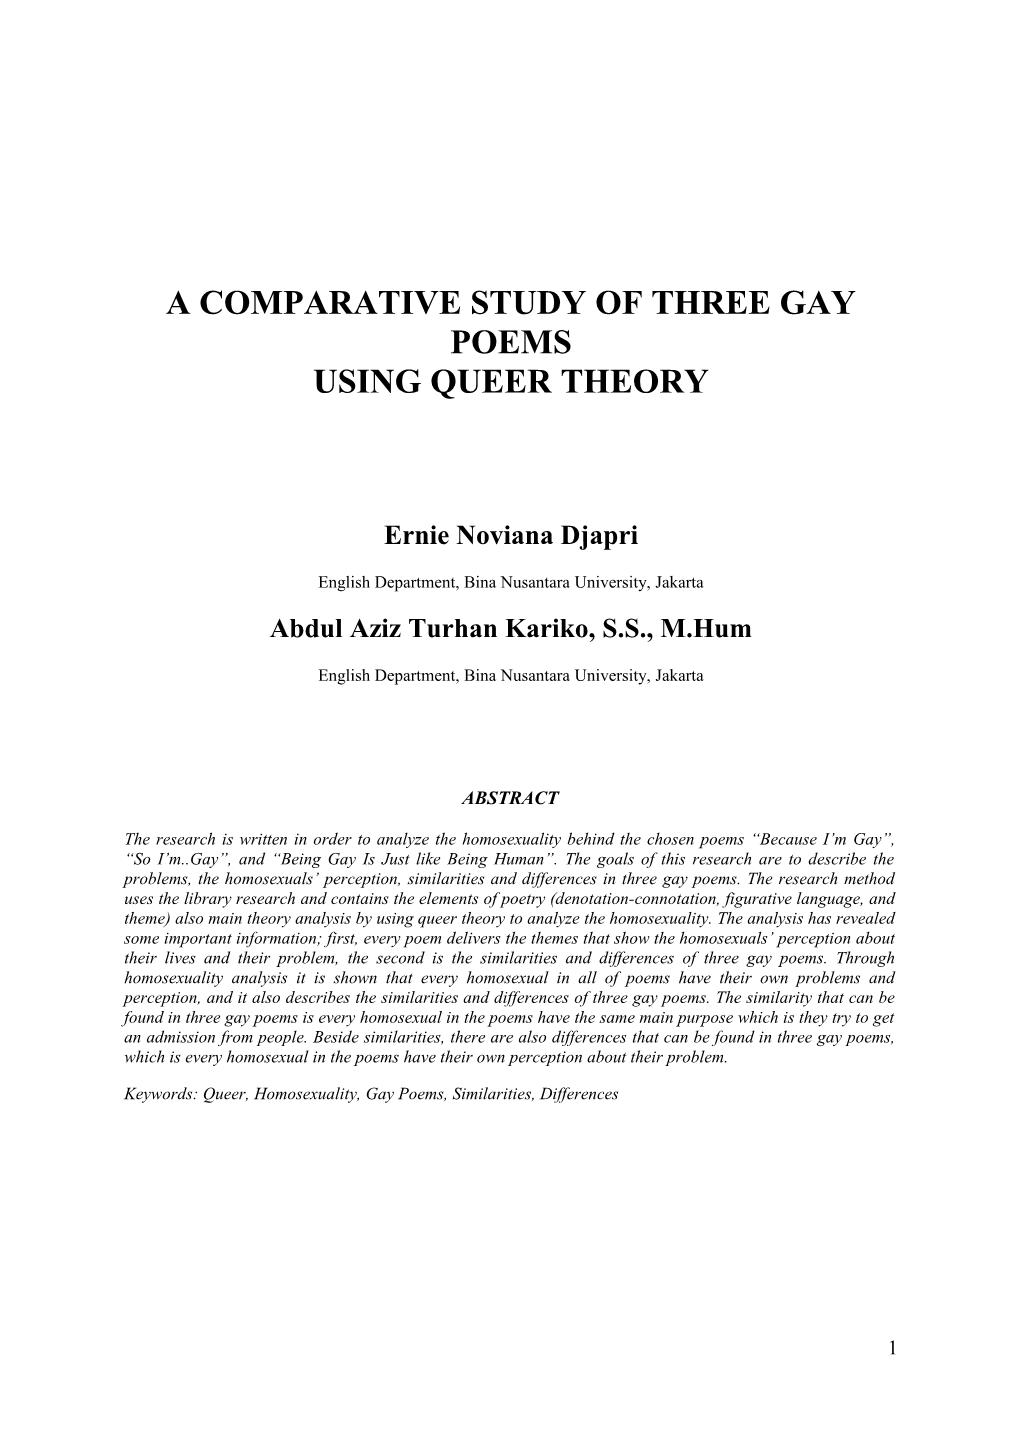 A Comparative Study of Three Gay Poems